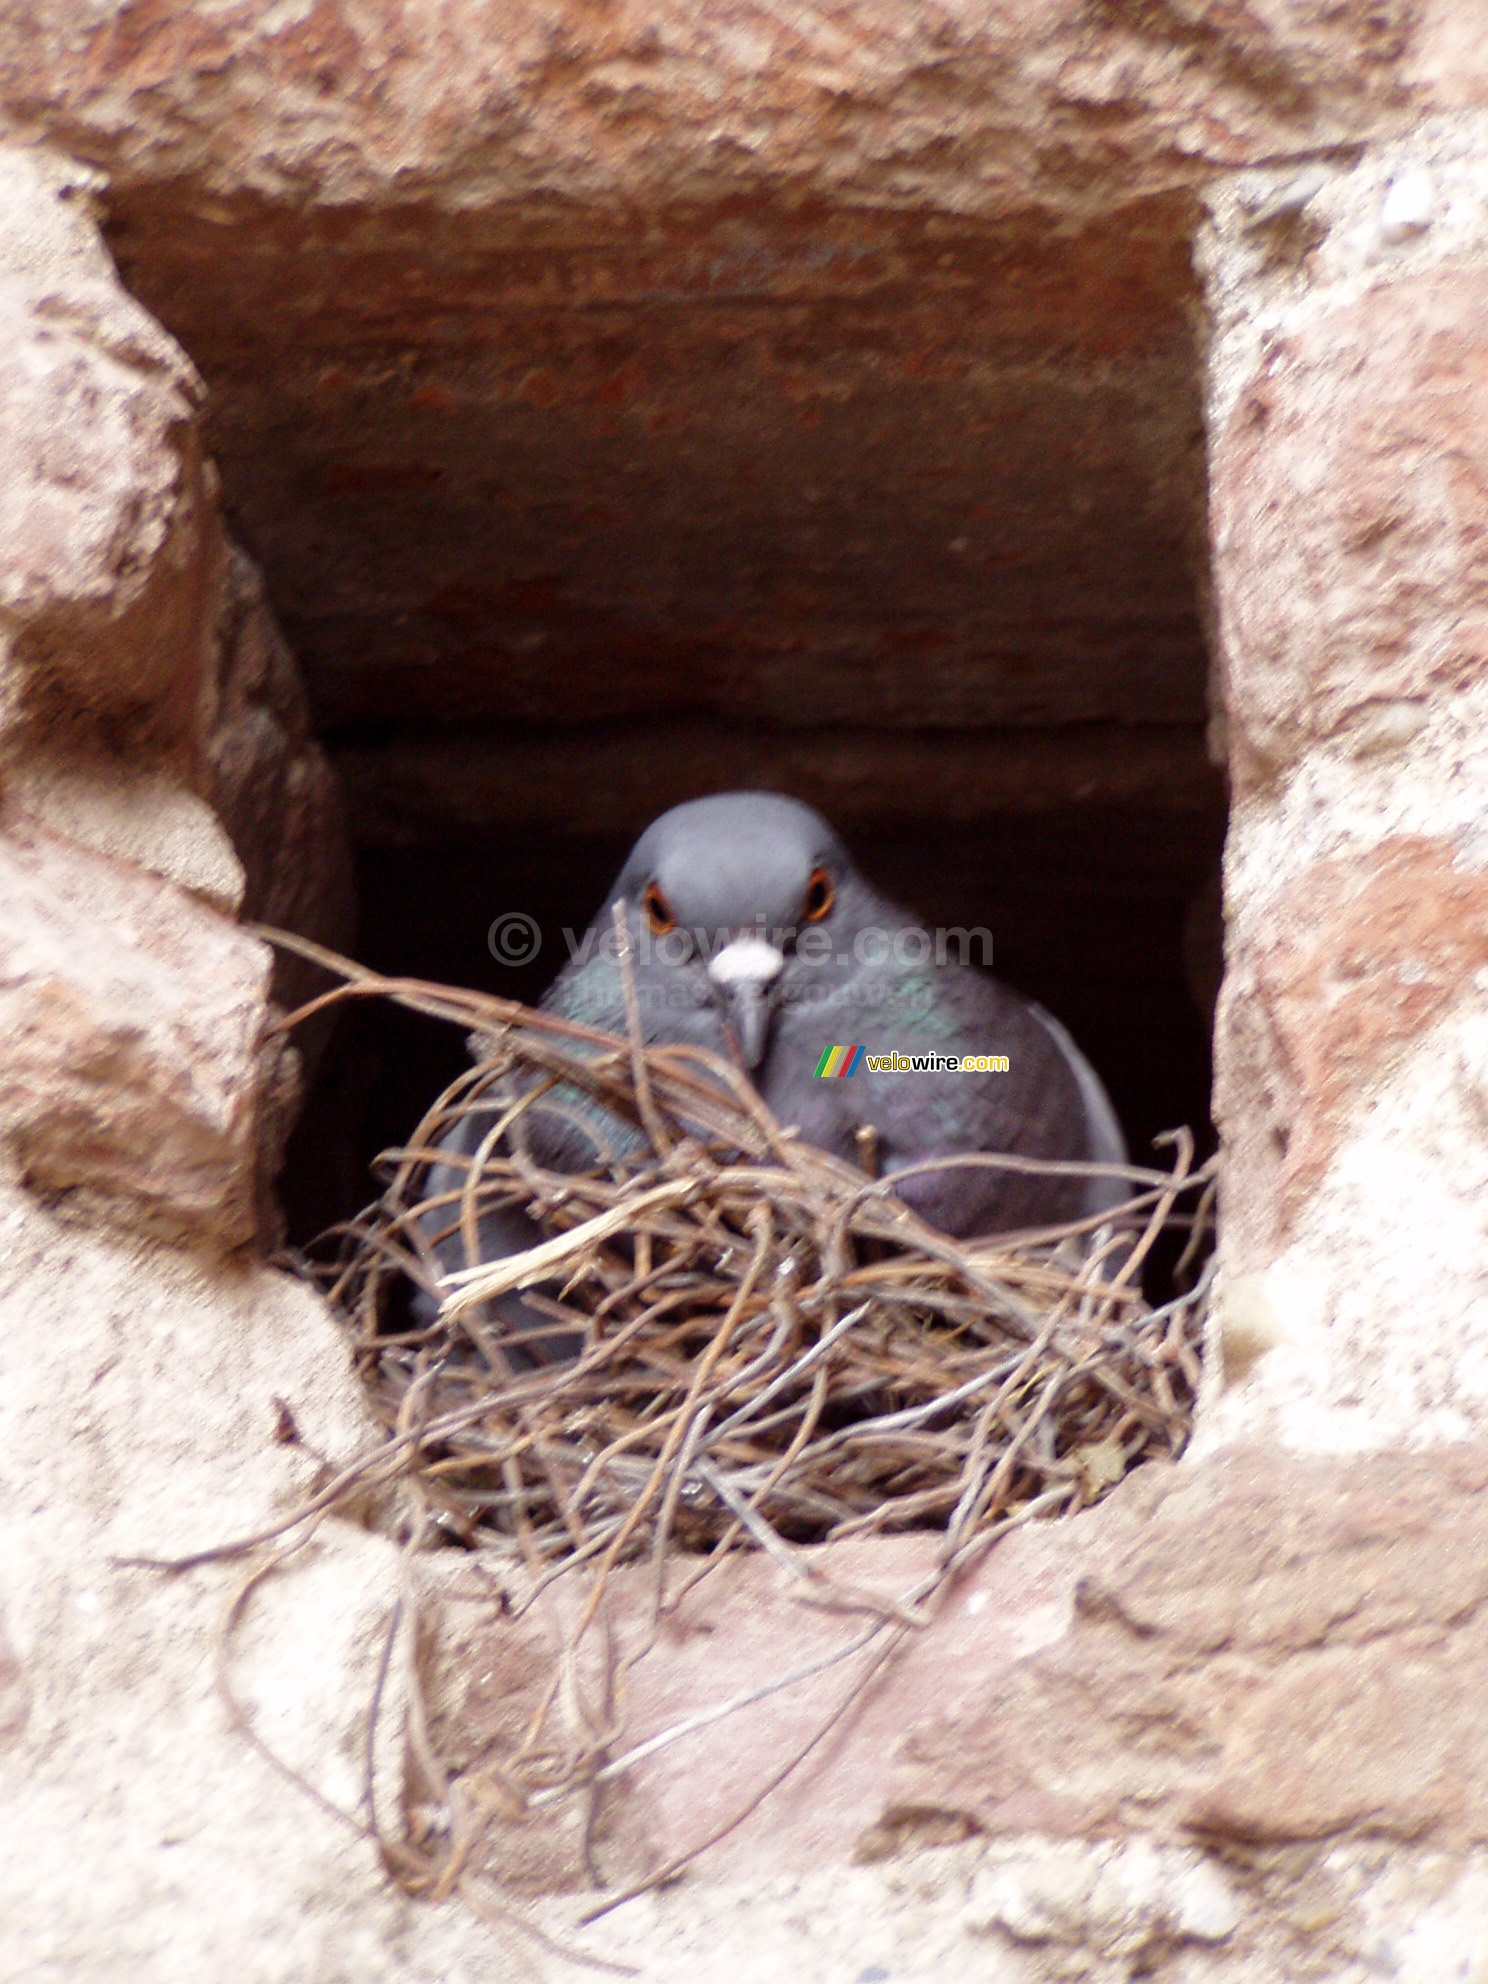 Breeding pigeon in a hole in the wall of the Basilique Sainte-Ccile in Albi